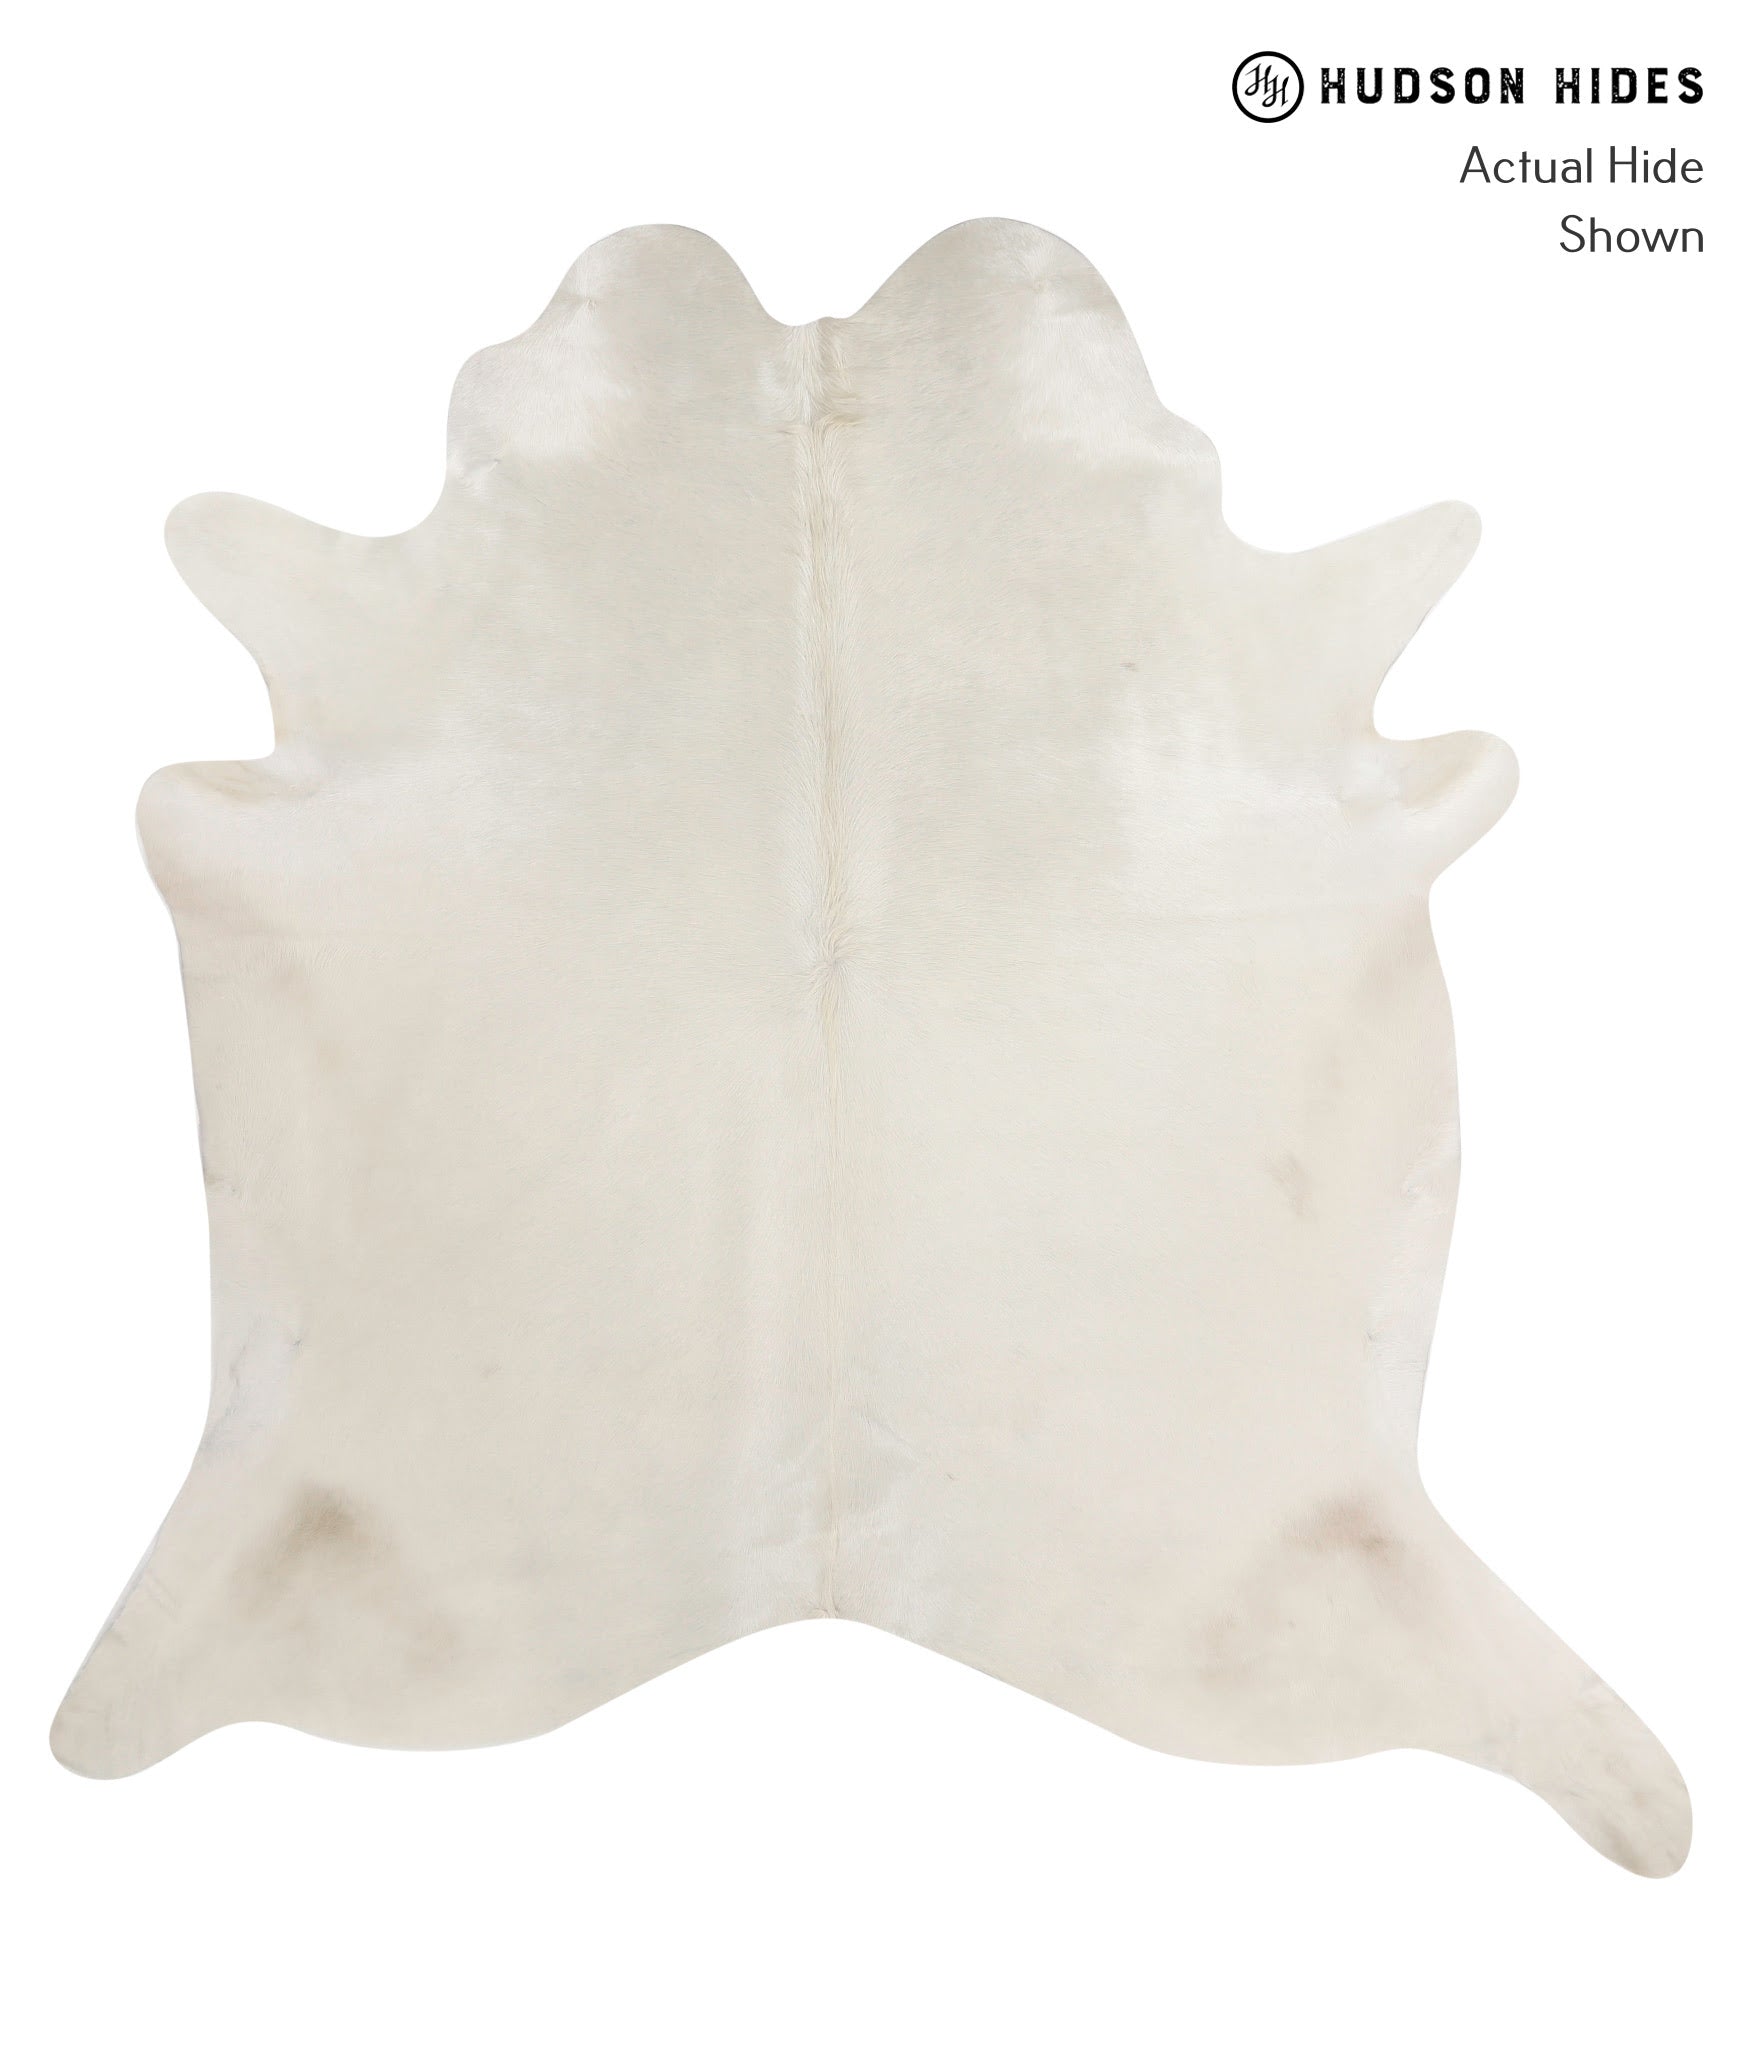 Solid White Cowhide Rug #81426